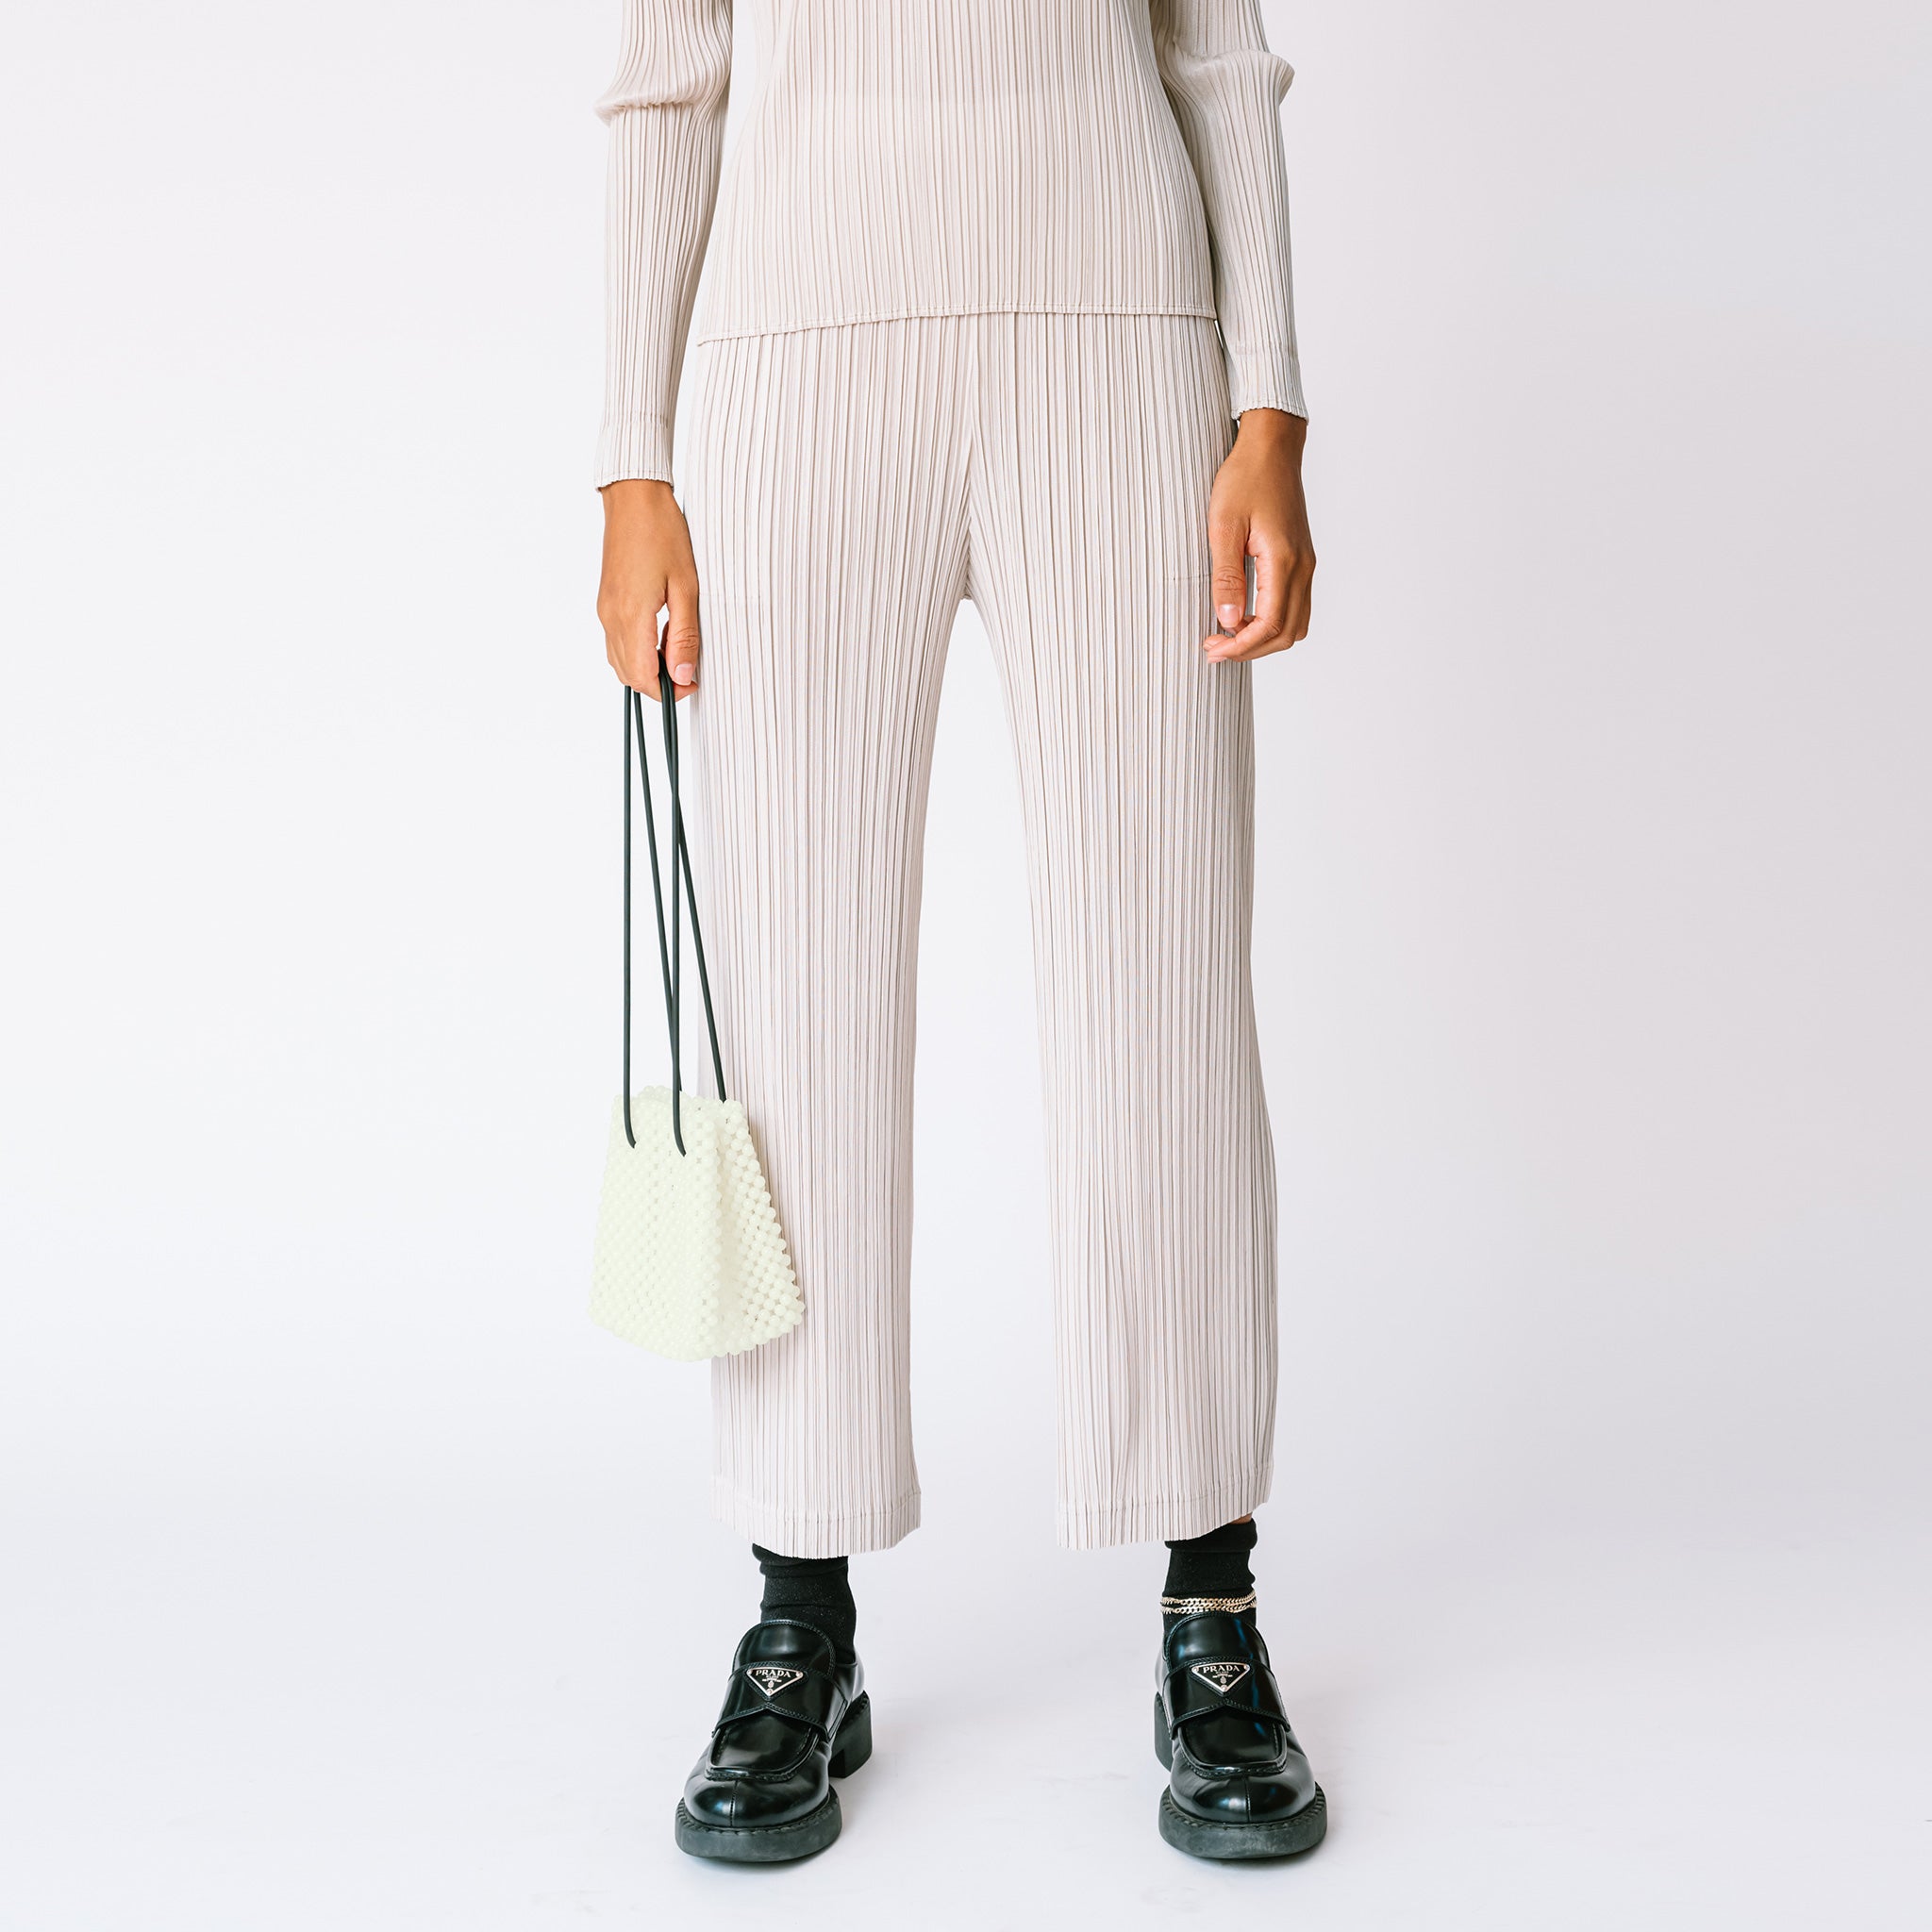 A model wears the light grey pleated Thicker Bottom 2 Pants by Pleats Please with matching top and black loafers.